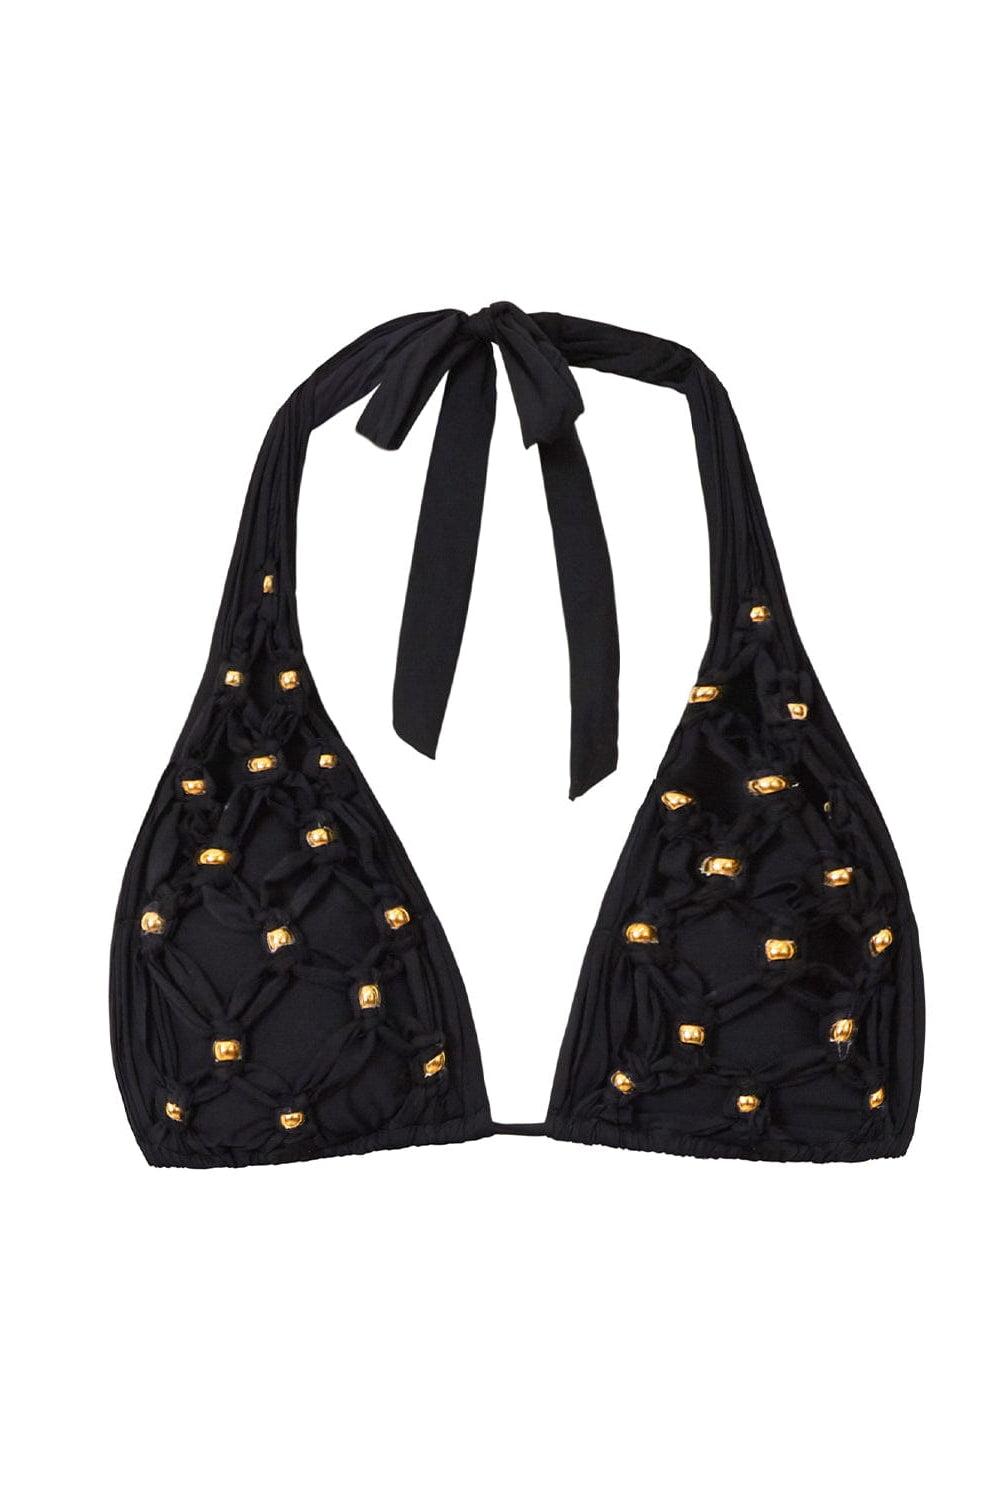 A black halter bikini top with net macramé details & shimmery gold accents. Featured against a white wall background.